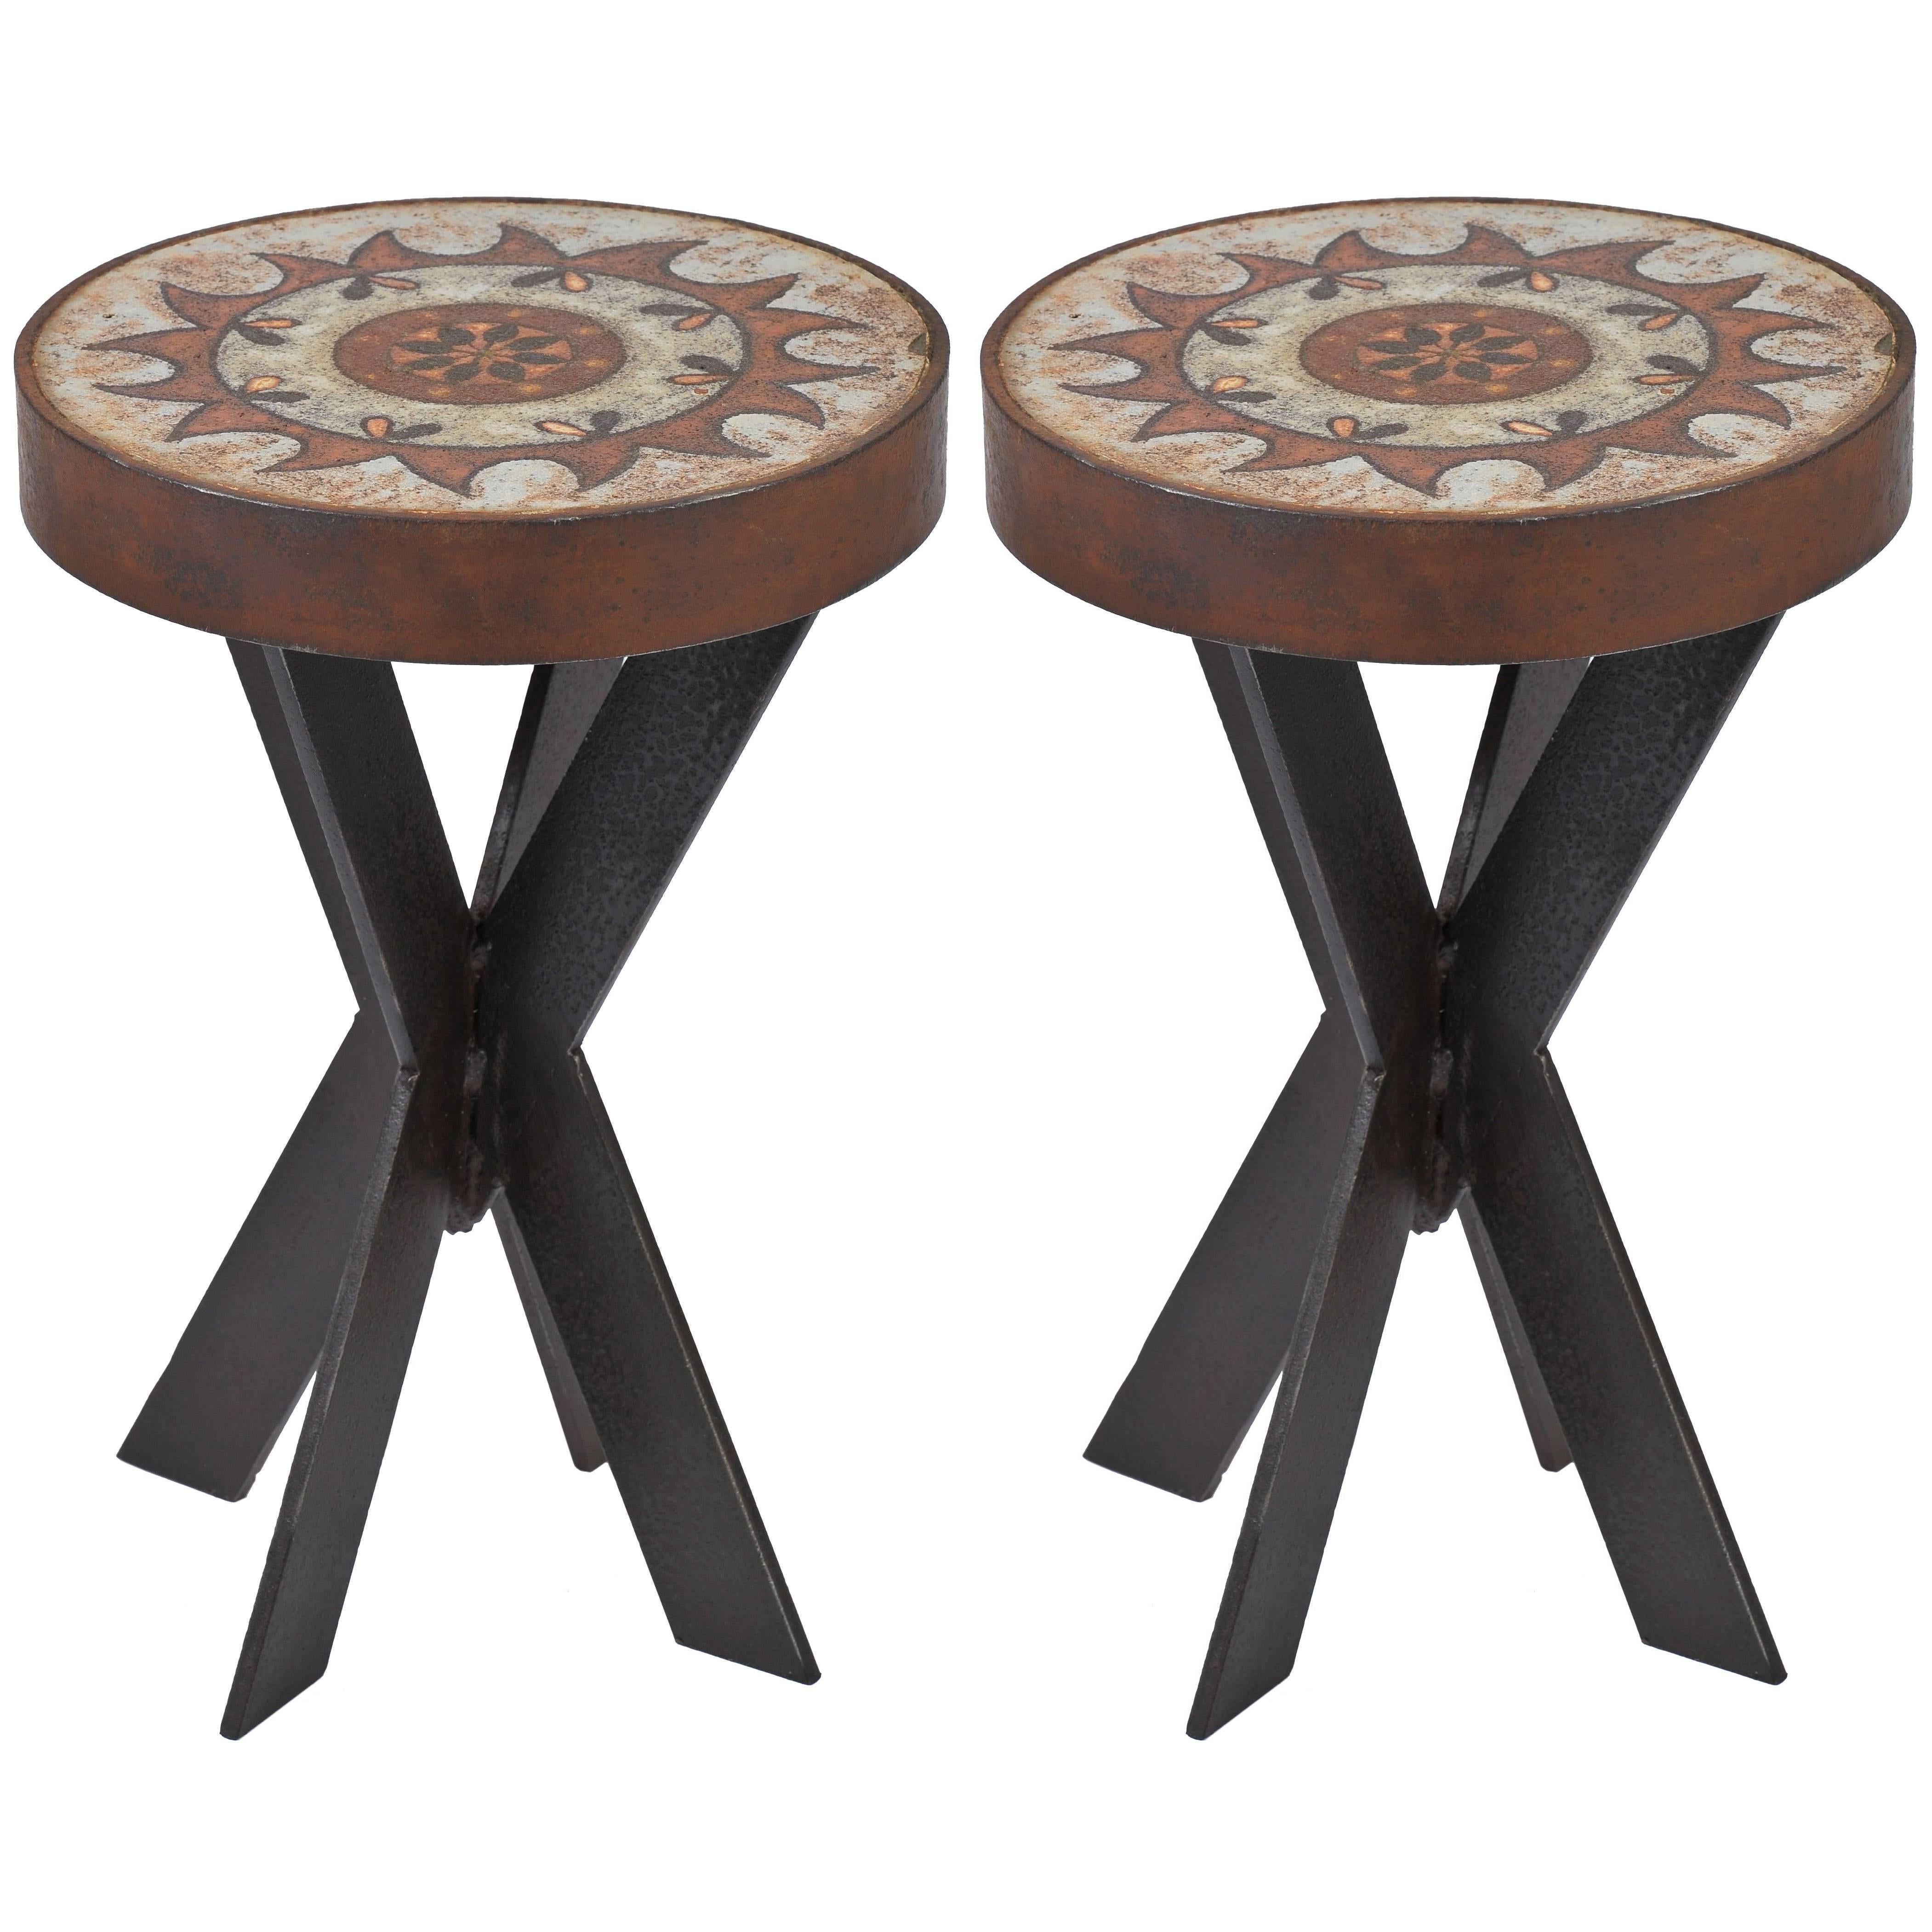 Pair of 1960s Ceramic Top Iron Stools or Side Tables